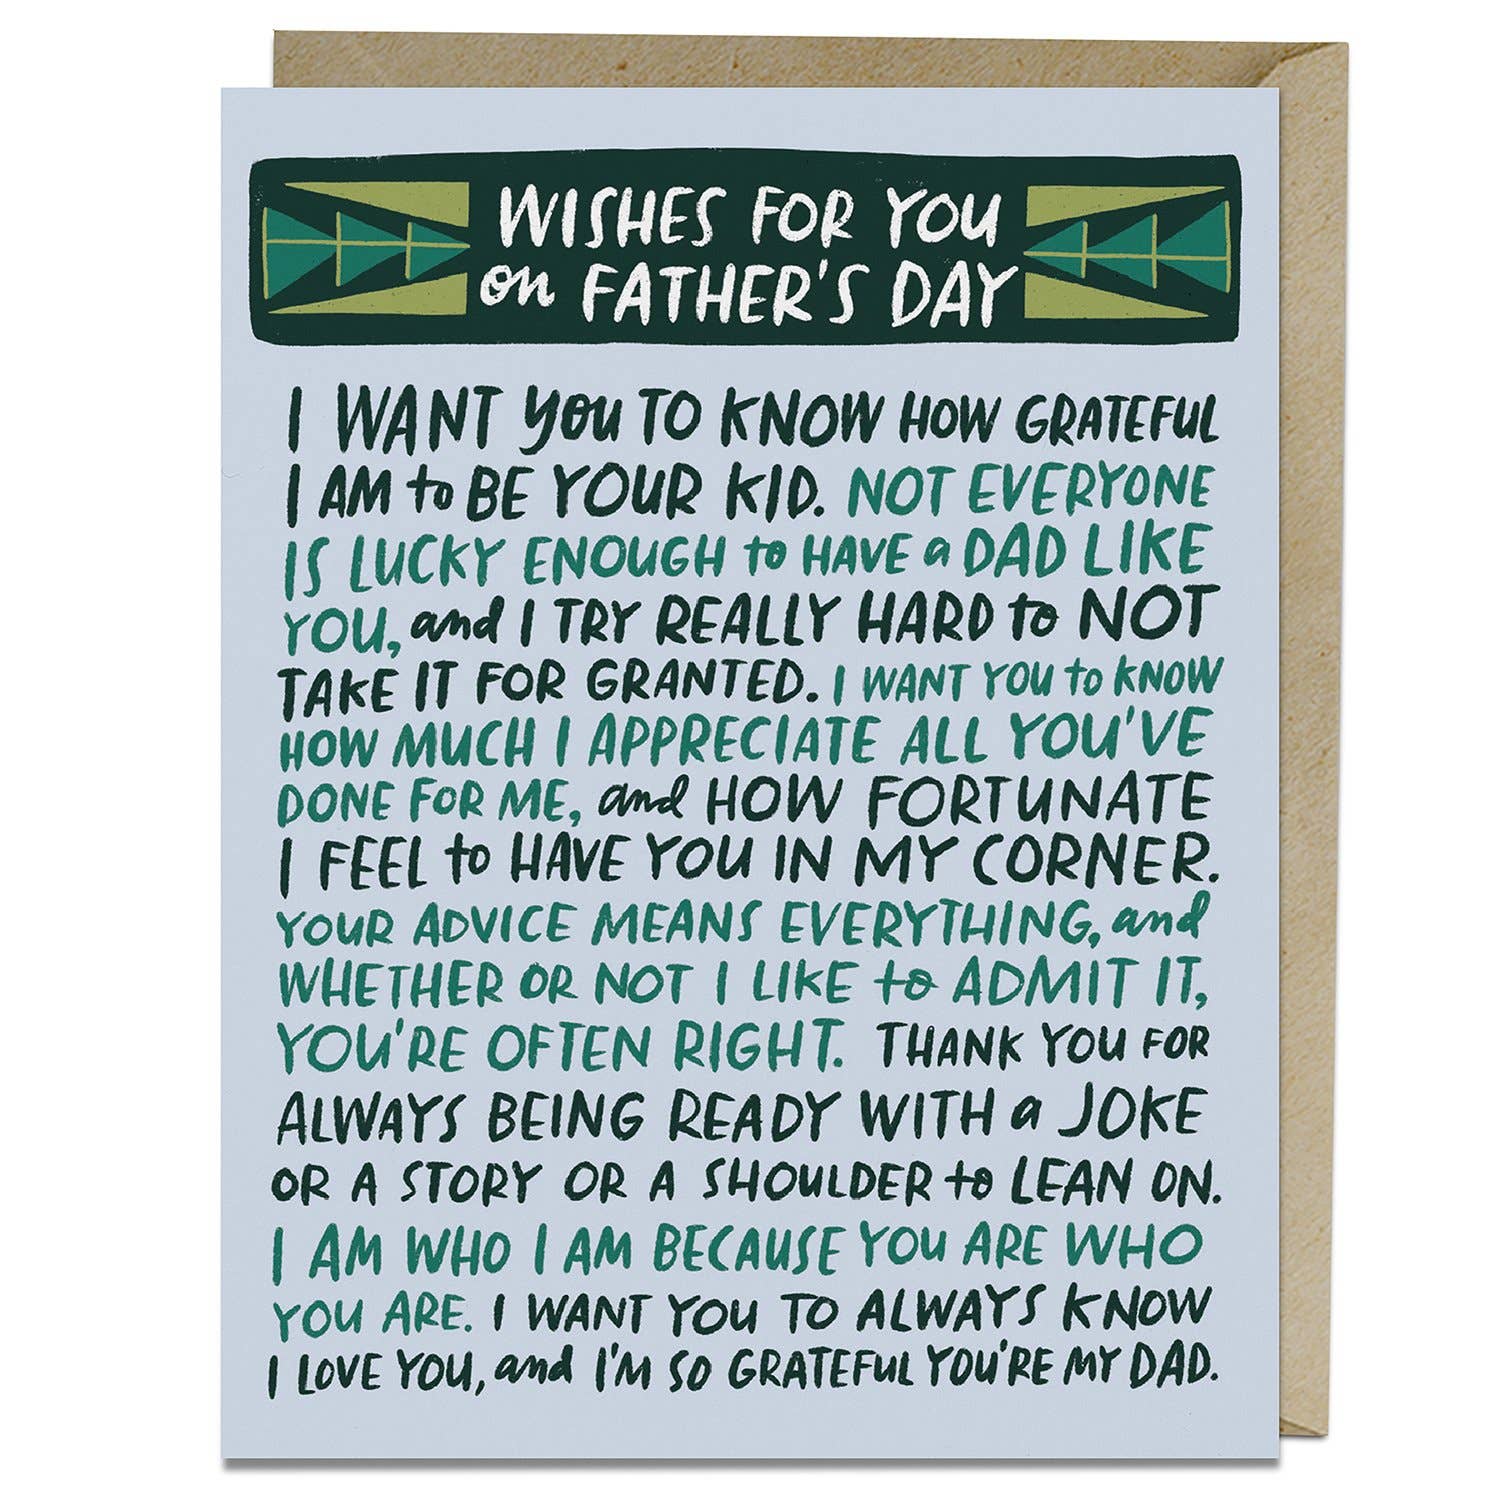 “Wishes for You” Fathers Day Card by Emily McDowell - by Emily McDowell - K. A. Artist Shop